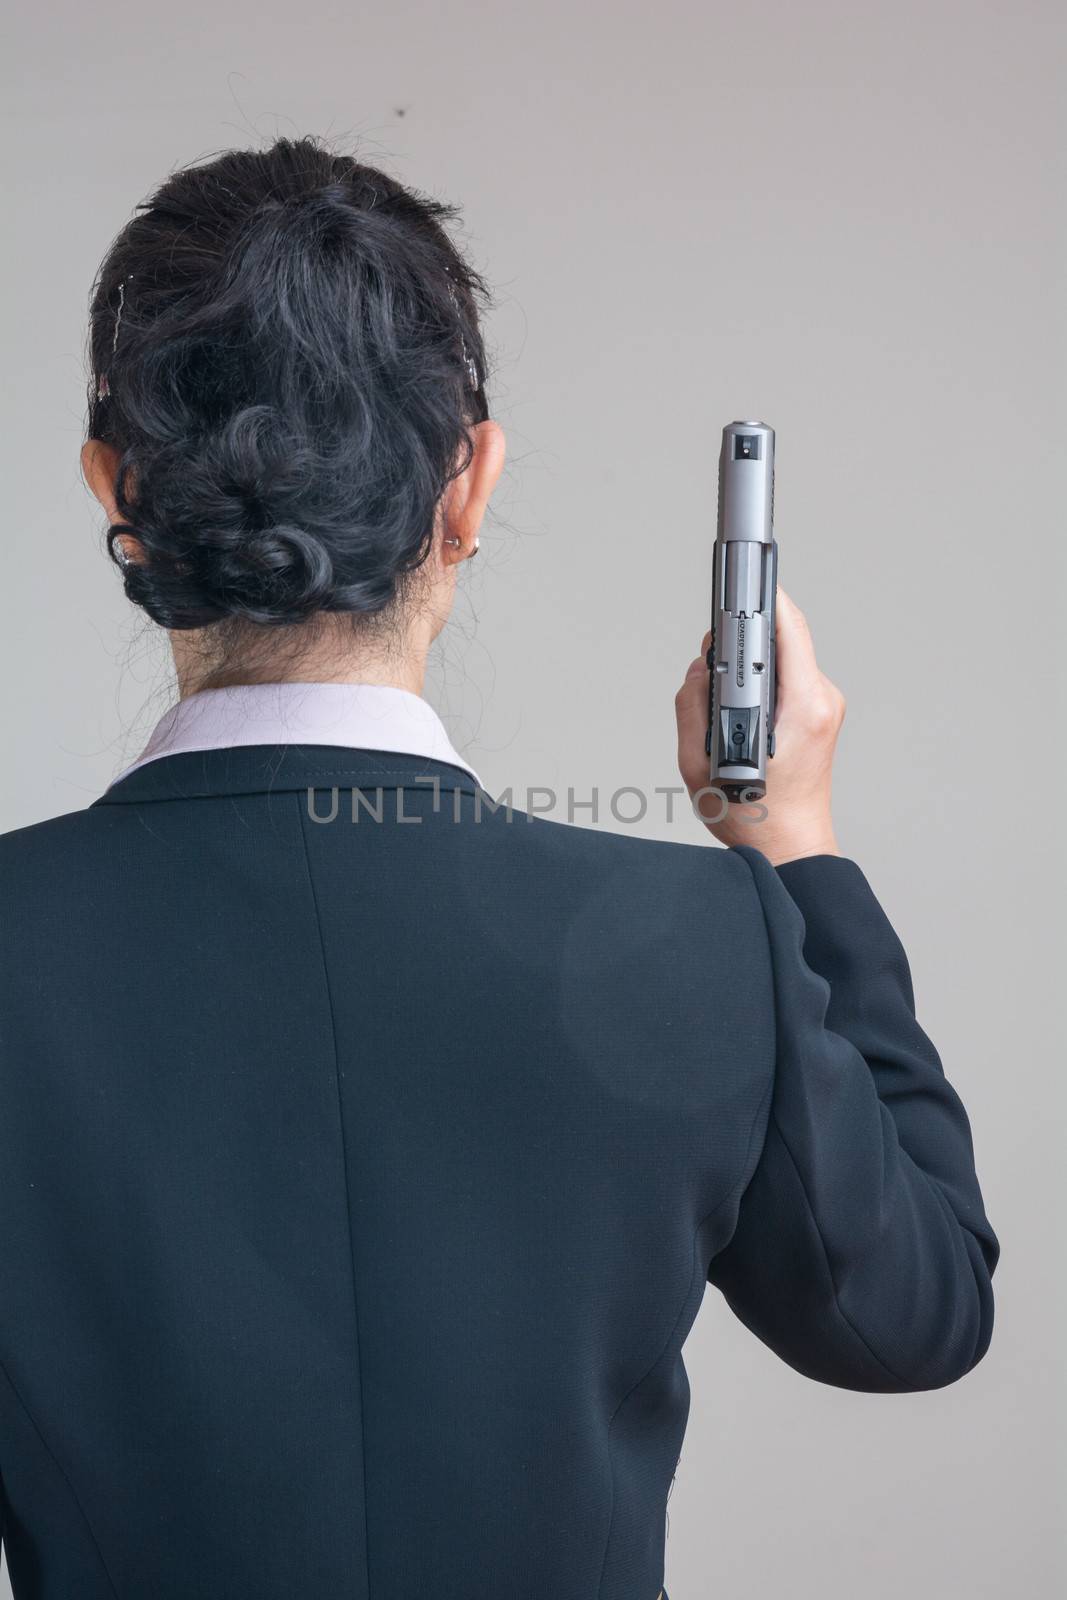 Back of woman in business suit holding a hand gun pointing up